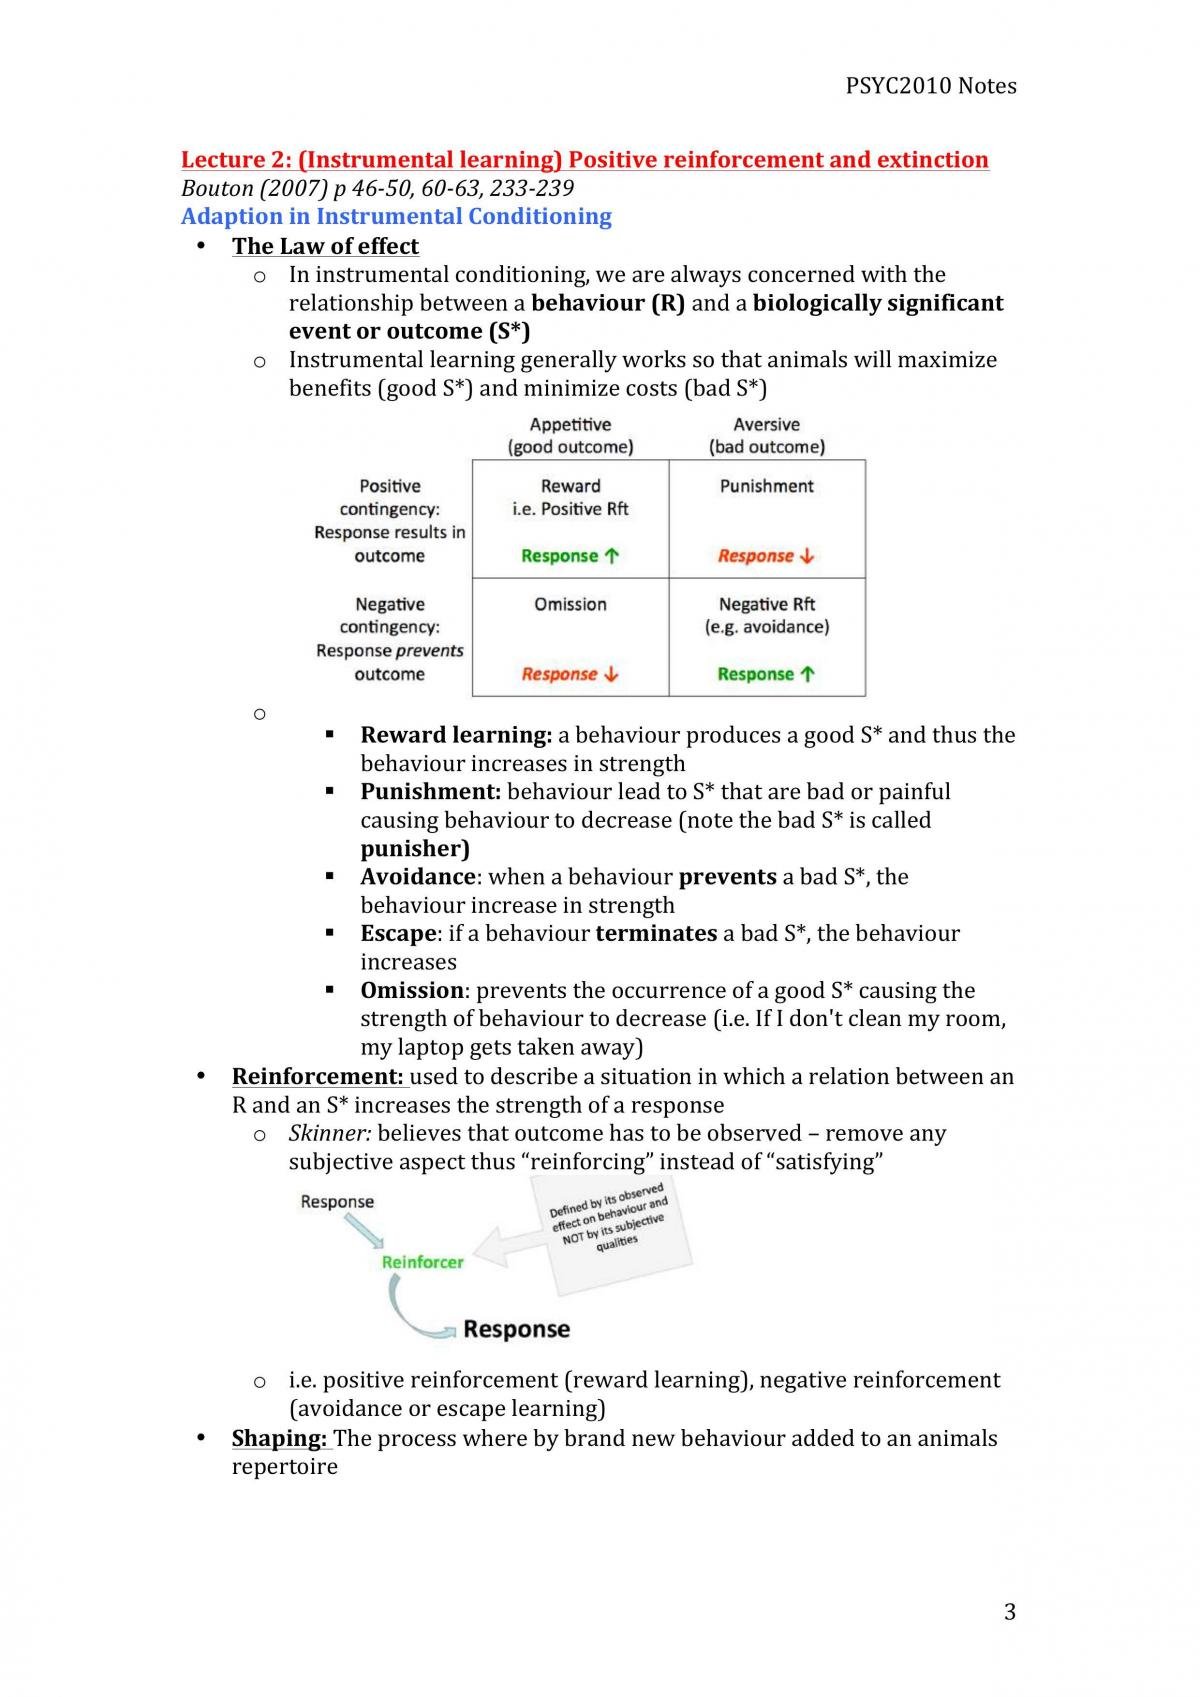 PSYC2010 Complete Set of Notes  - Page 3